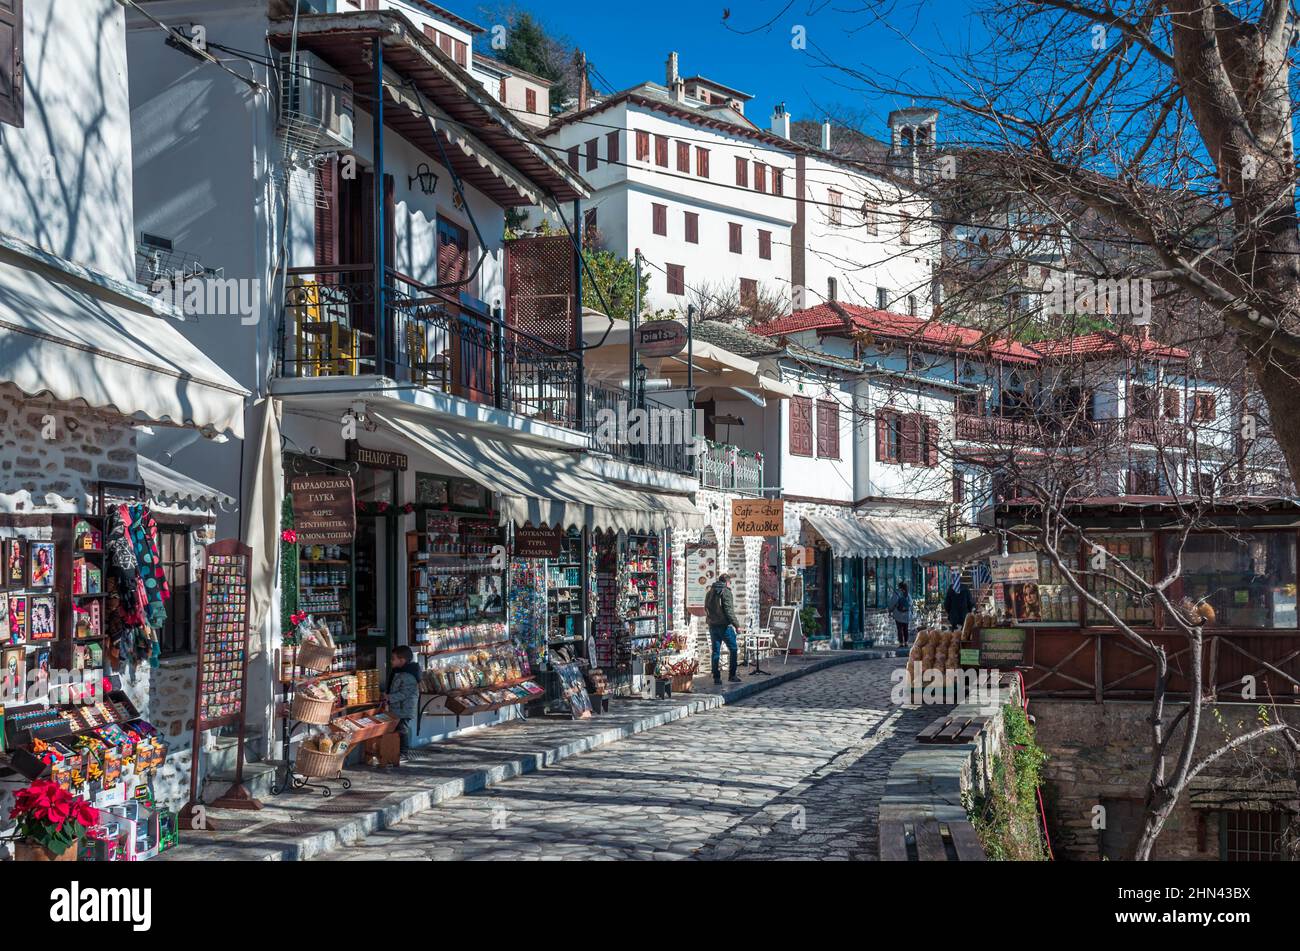 Makrinitsa Greece - Traditional village of Makrinitsa with the stone built houses and the picturesque square, lies on the slopes of Pelion Stock Photo